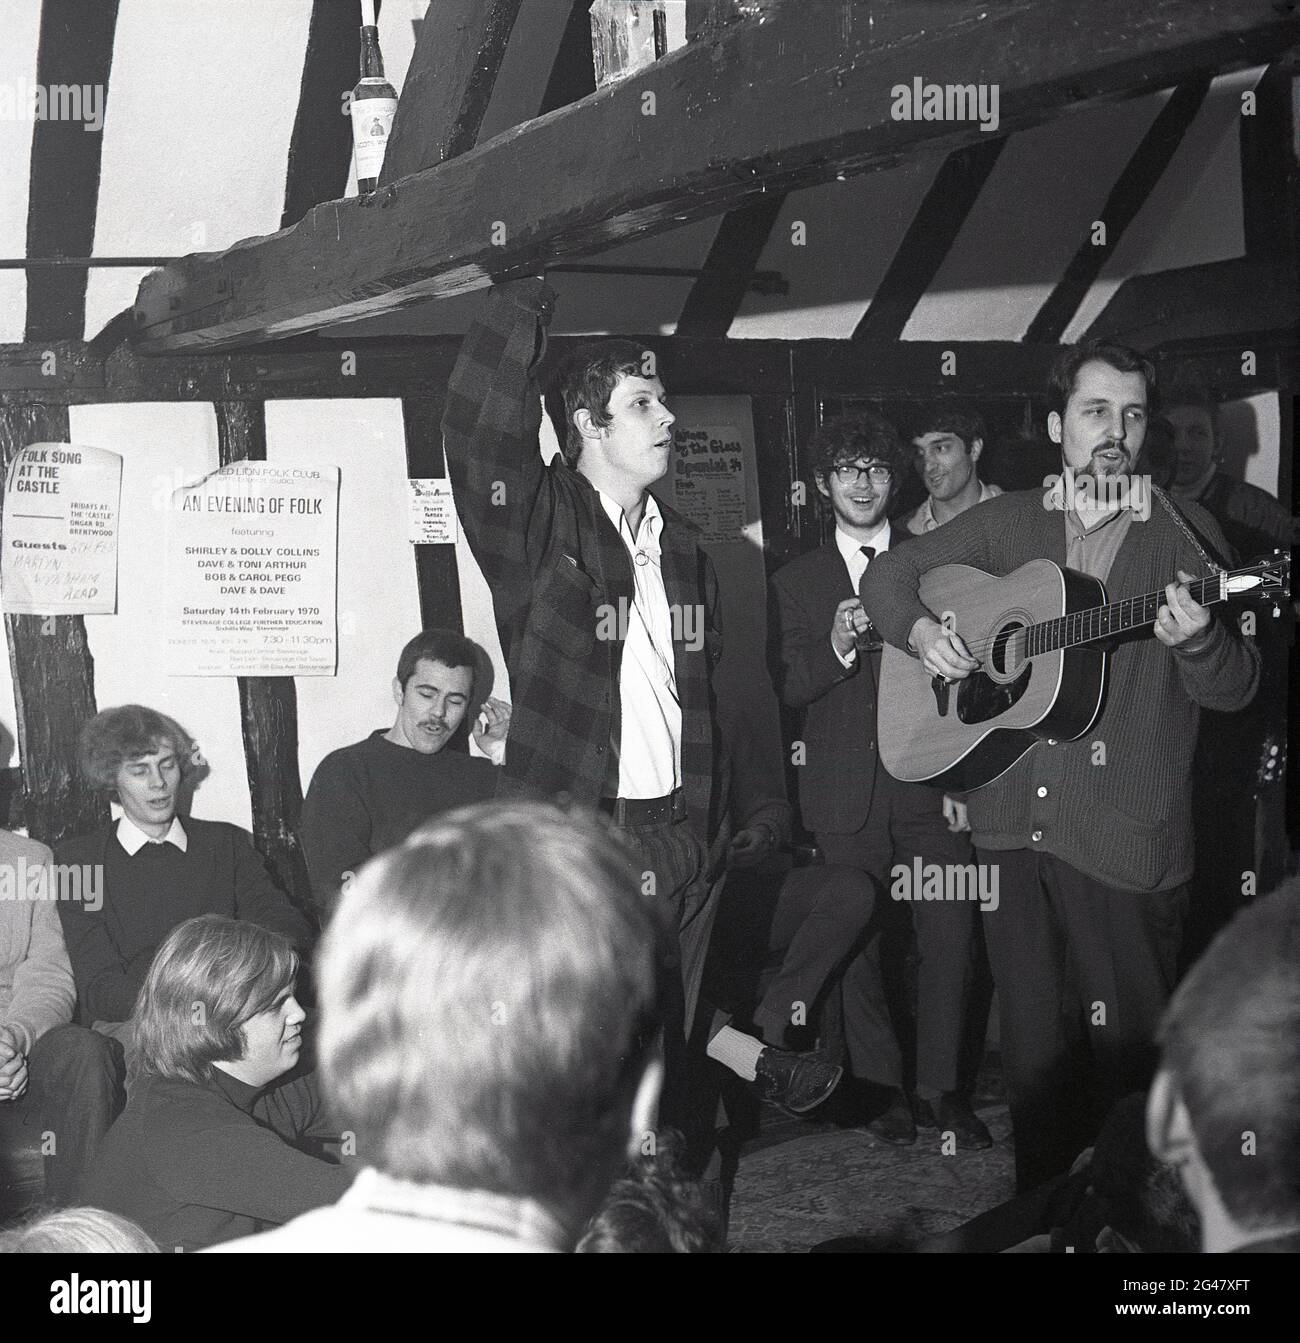 1970, historical, folk music, inside a wooden beamed room in a pub, an audience of young people listening to a folk musican, a man in a cardigan standing playing a guitar, The Castle Inn, Ongar Rd, Brentwood, Essex, England, UK. Publicity poster on the wall, giving notice of 'An Evening Of Folk' featuring sisters, Shirley & Dolly Collins, Dave & Toni Arthur, Bob & Carol Pegg, and Dave & Dave at the Stevenage College of Further Education, promoted by the Red Lion Folk Club. Stock Photo